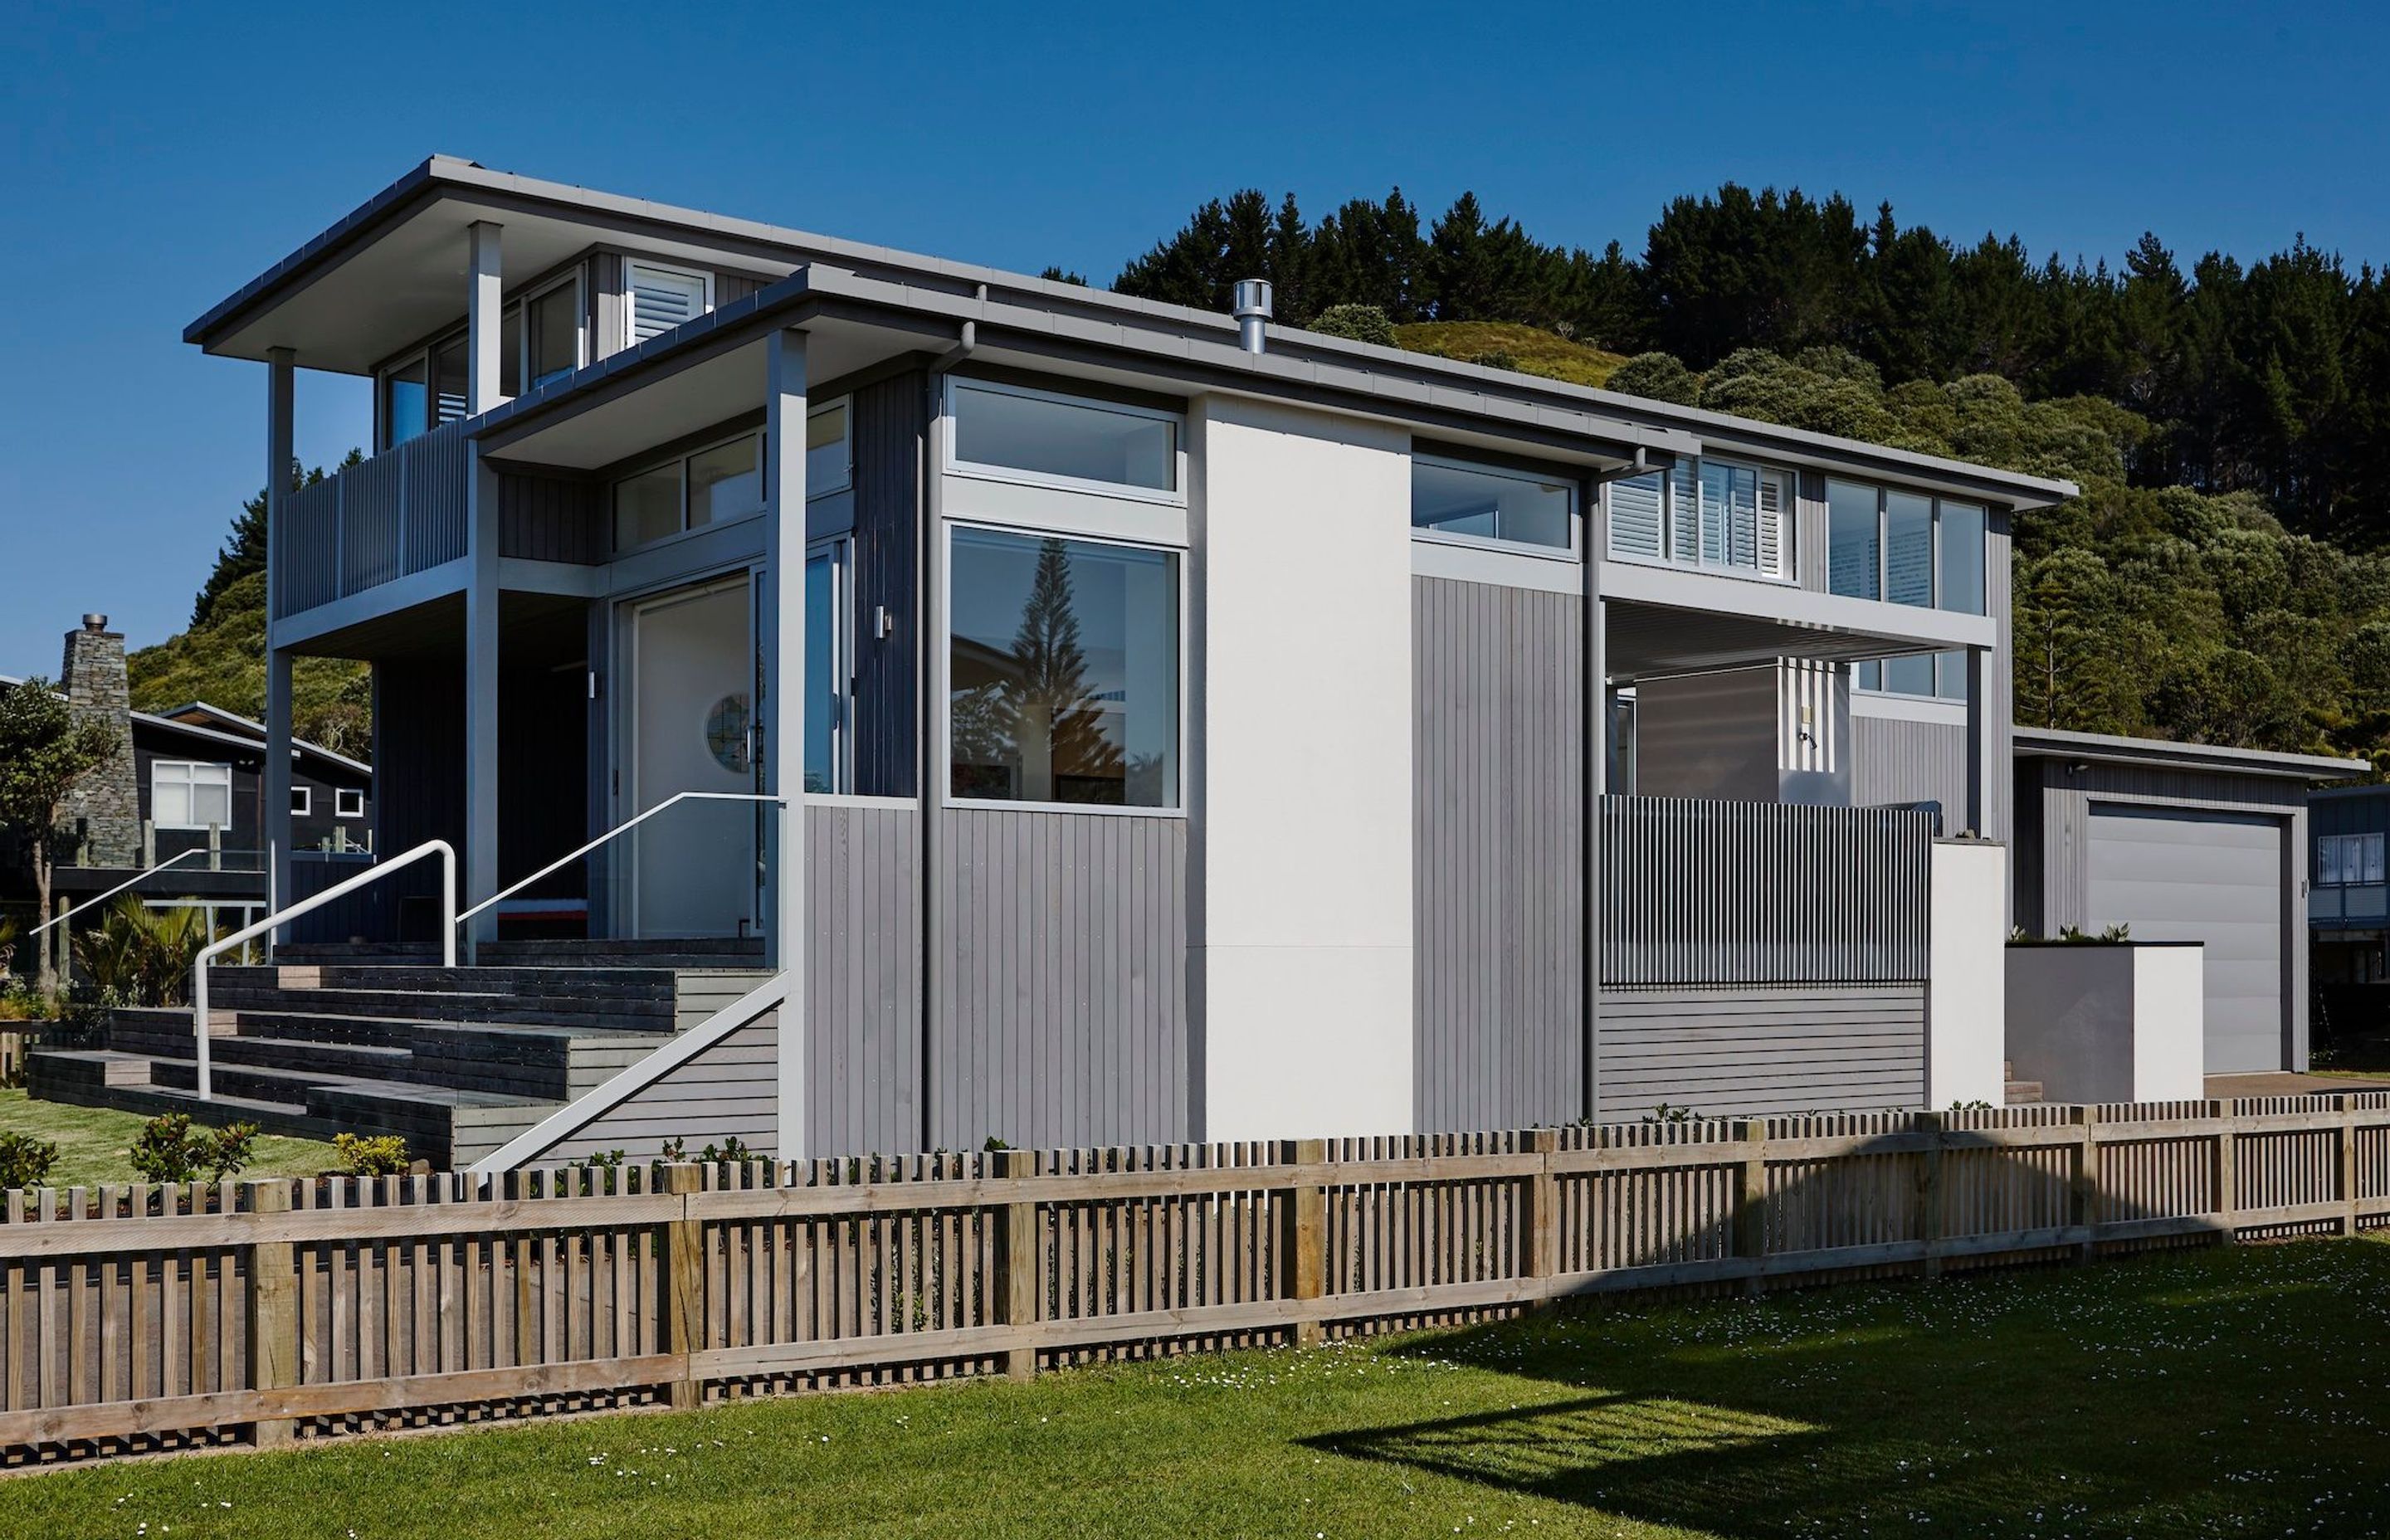 The house is cedar and aluminium, chosen to withstand the coastal environment. “When we were thinking about material palettes it really does speak to the New Zealand vernacular: those greys, those lighter colours, and the backdrop of bush,” says Kate.